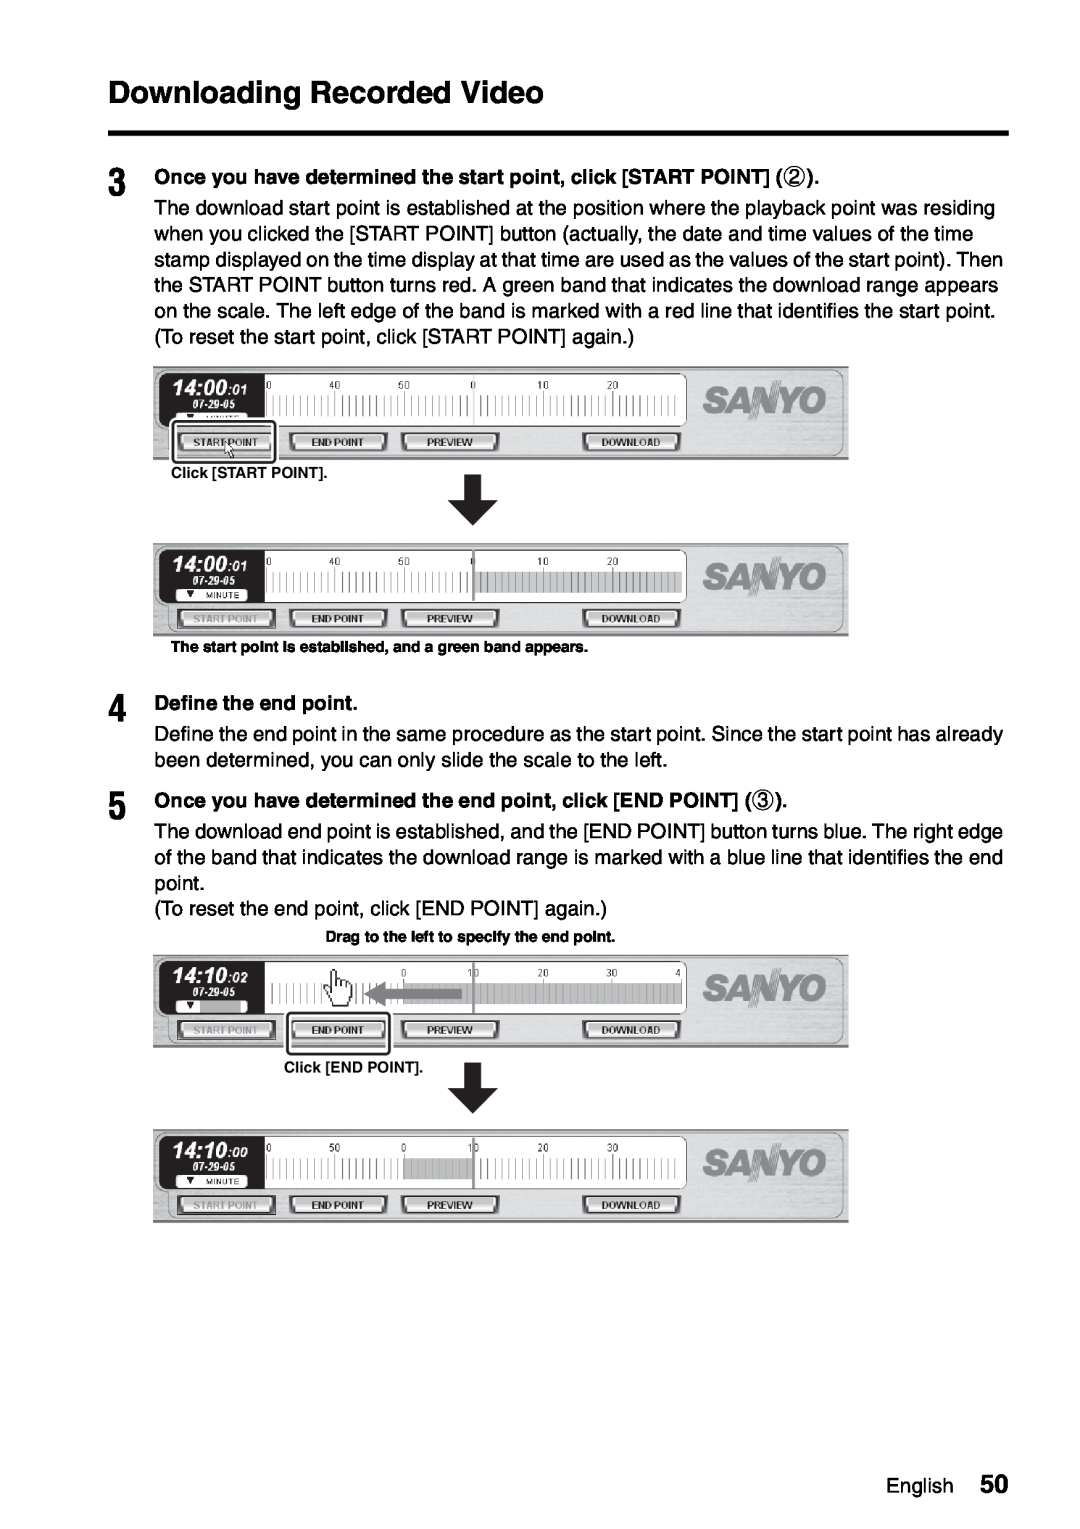 Sanyo VA-SW8000LITE instruction manual Define the end point, Downloading Recorded Video 